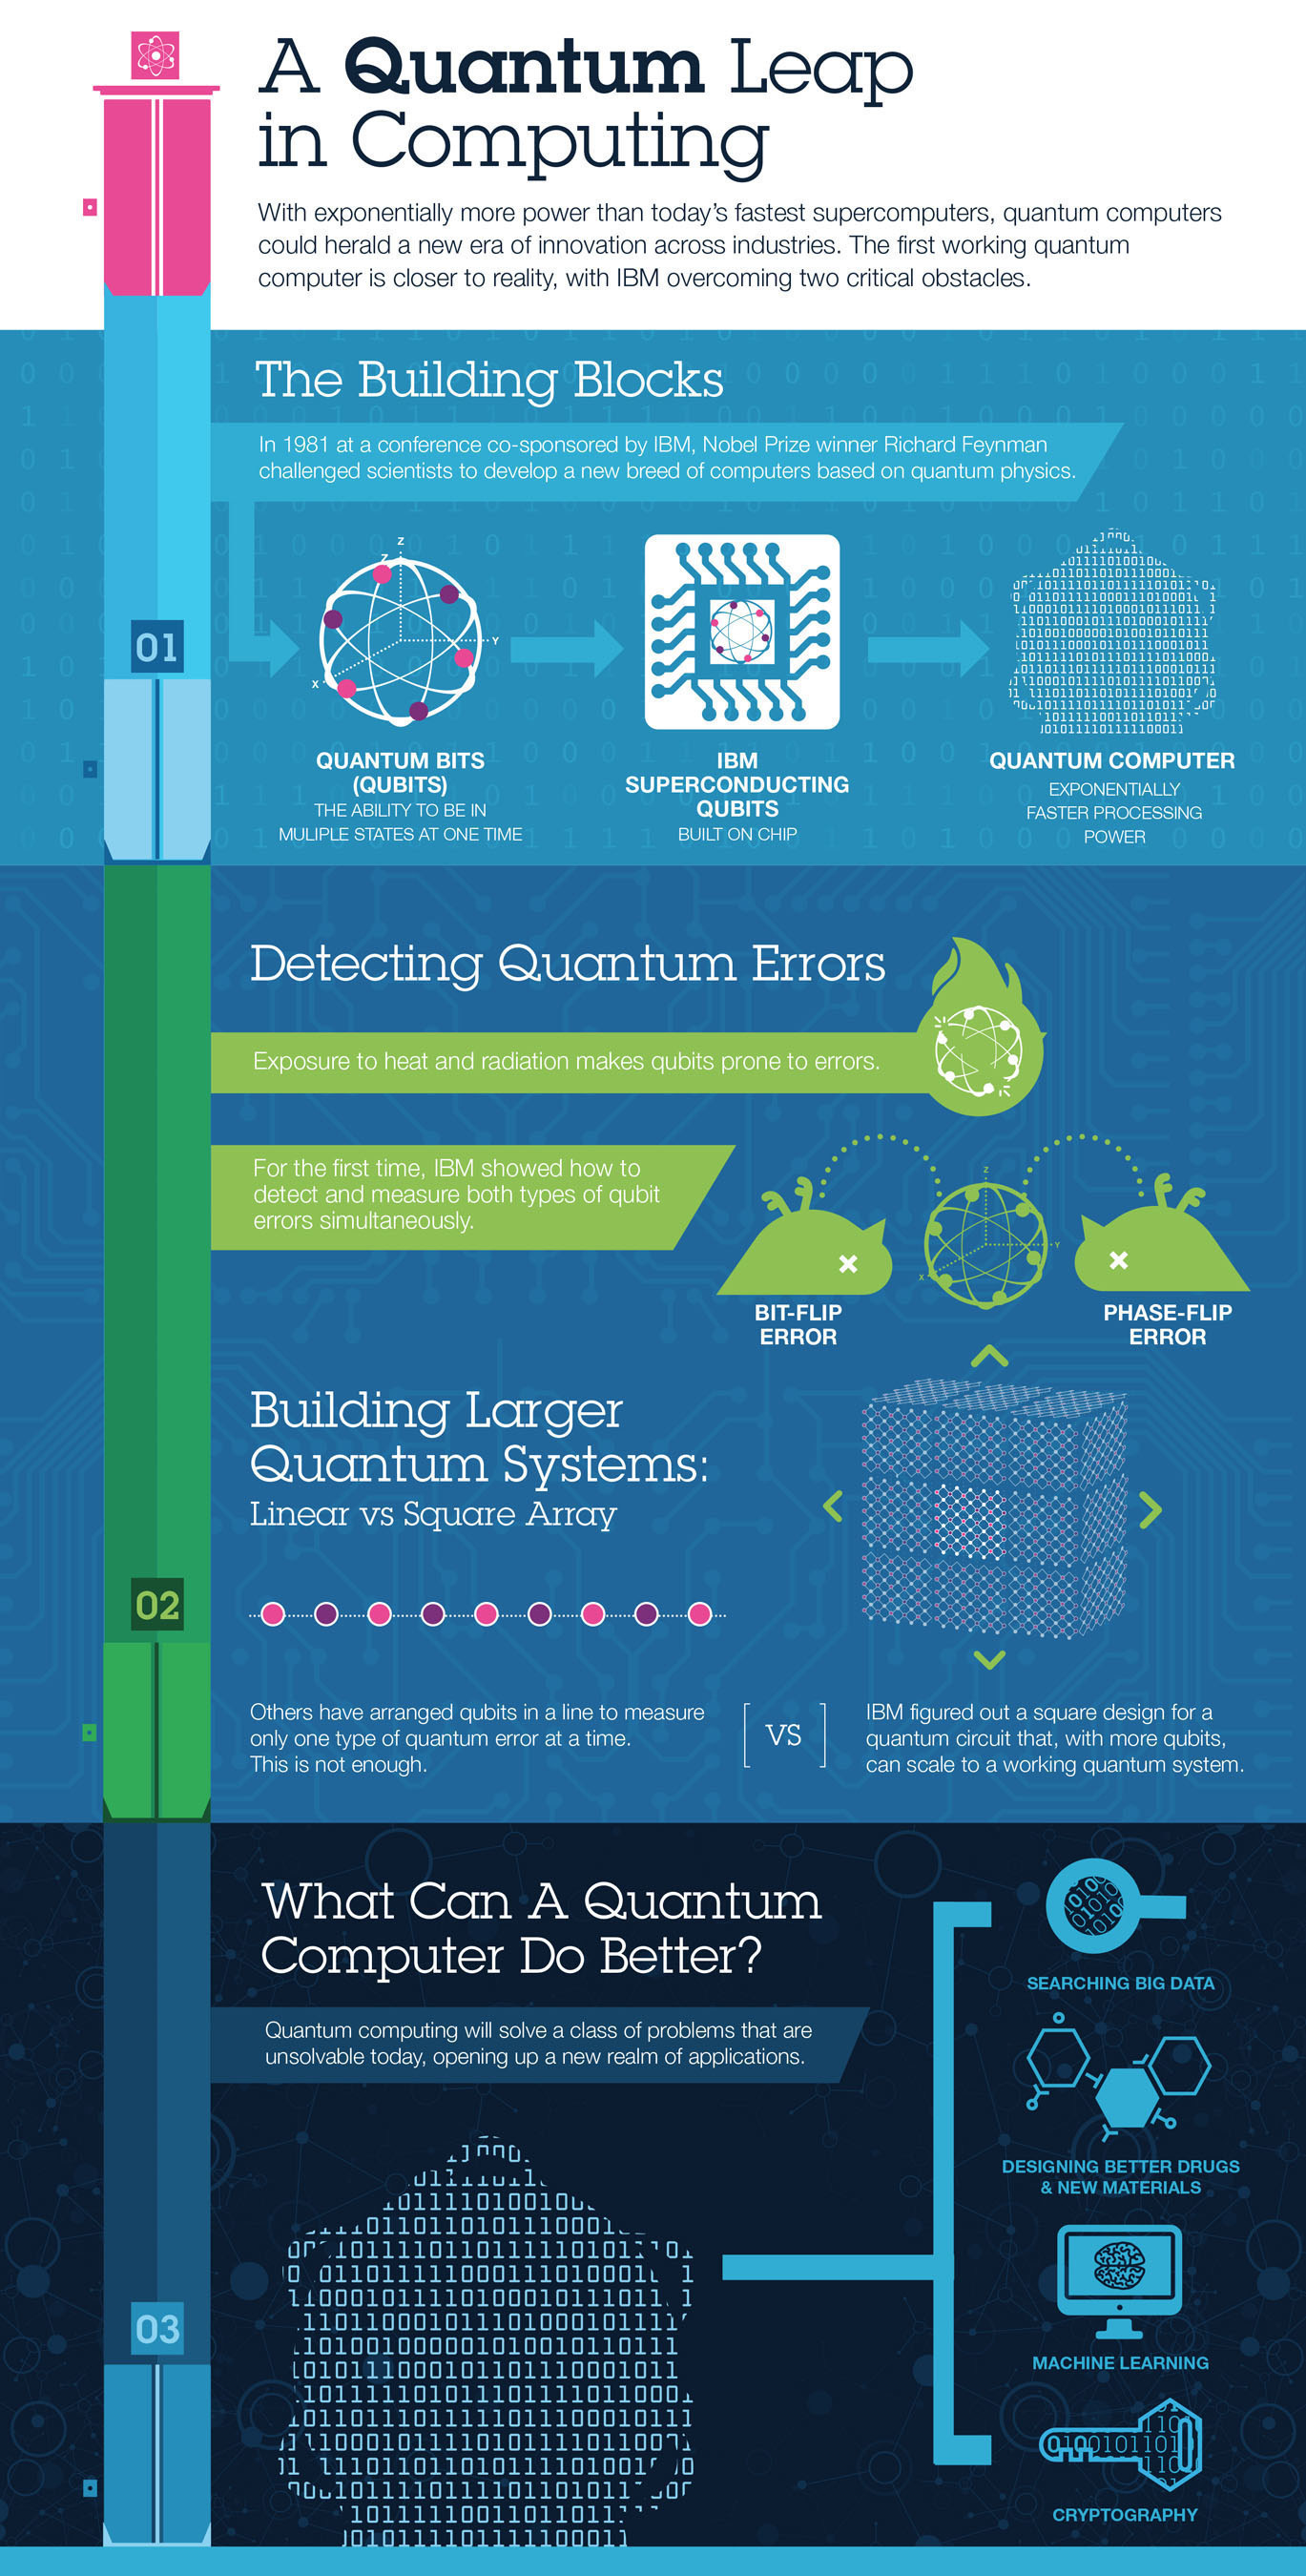 A Quantum Leap in Computing: With exponentially more power than today's fastest supercomputers, quantum computers could herald a new era of innovation across industries. The first working  quantum computer is closer to reality, with IBM overcoming two critical obstacles.